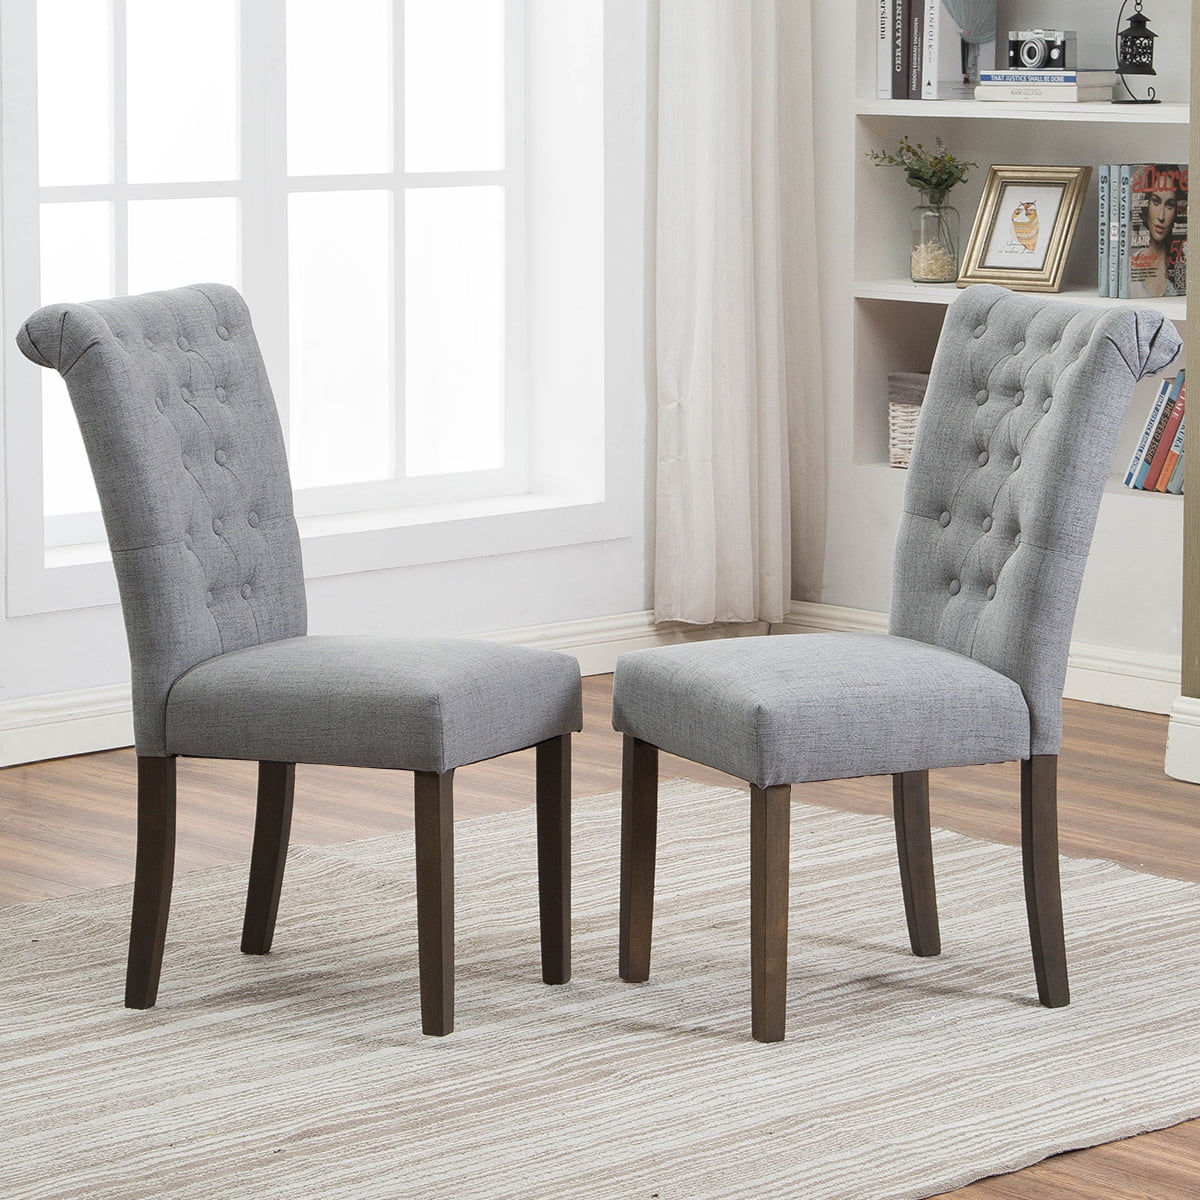 Grey Tufted Dining Chairs Set of 2, Upholstered High Back ...